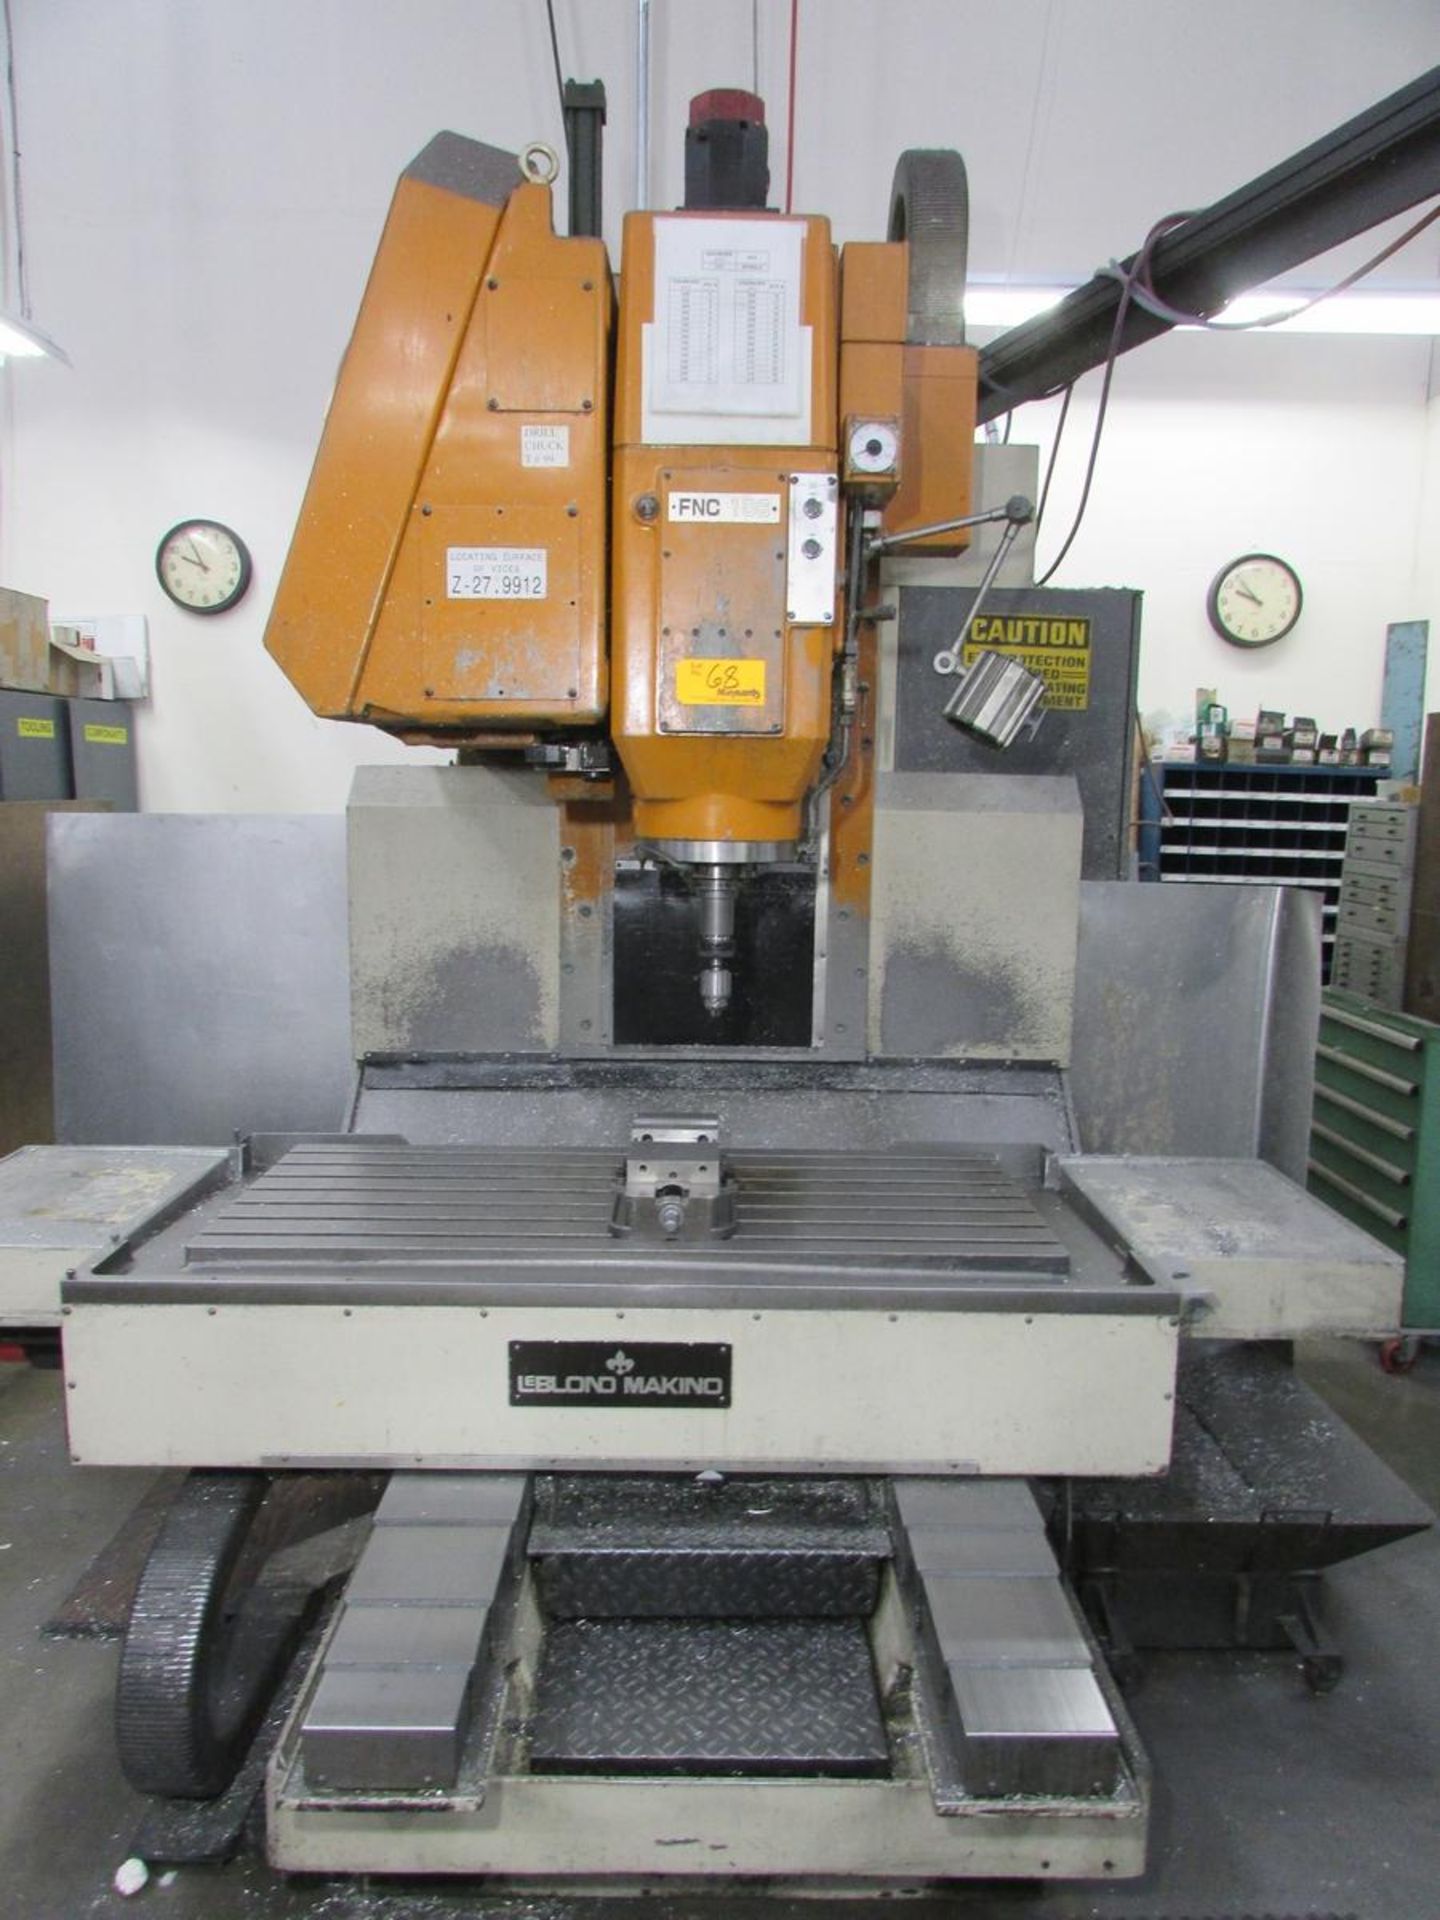 LeBlond Makino FNC106-A30 3-Axis CNC Vertical Maching Center - Image 3 of 22